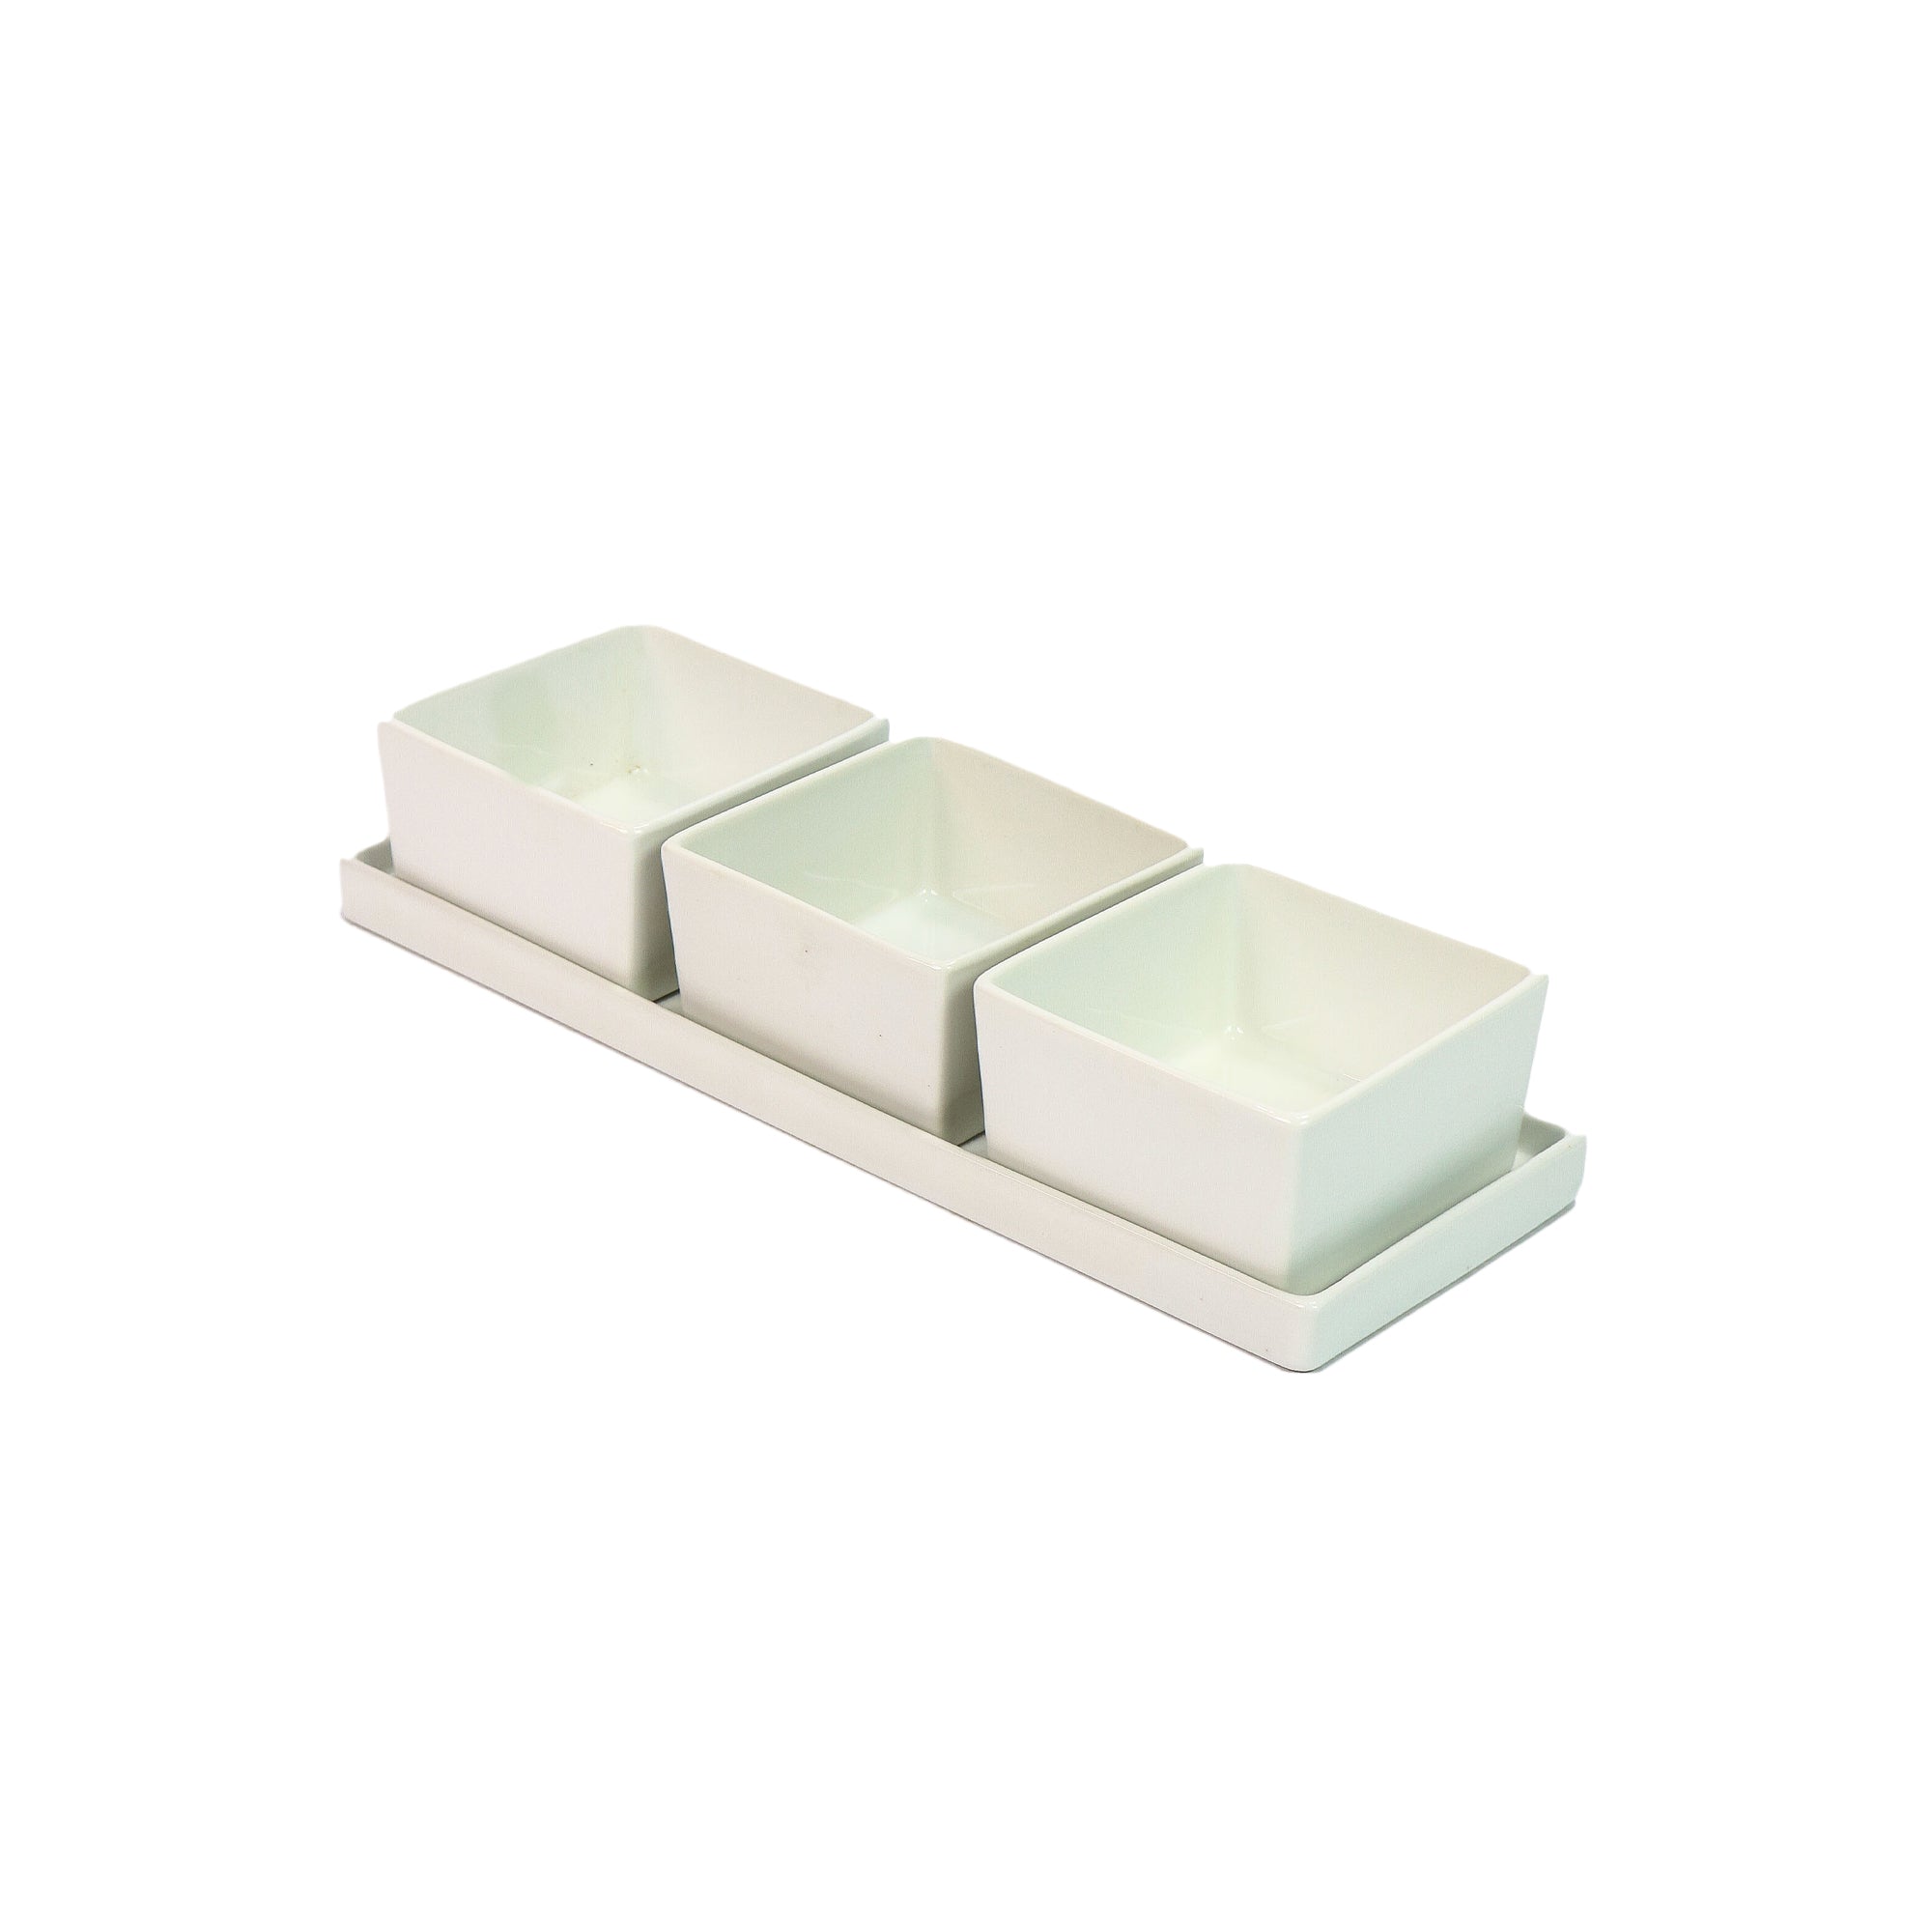 3 Bowl Square Ceramic with Small Tray INMIX 10845